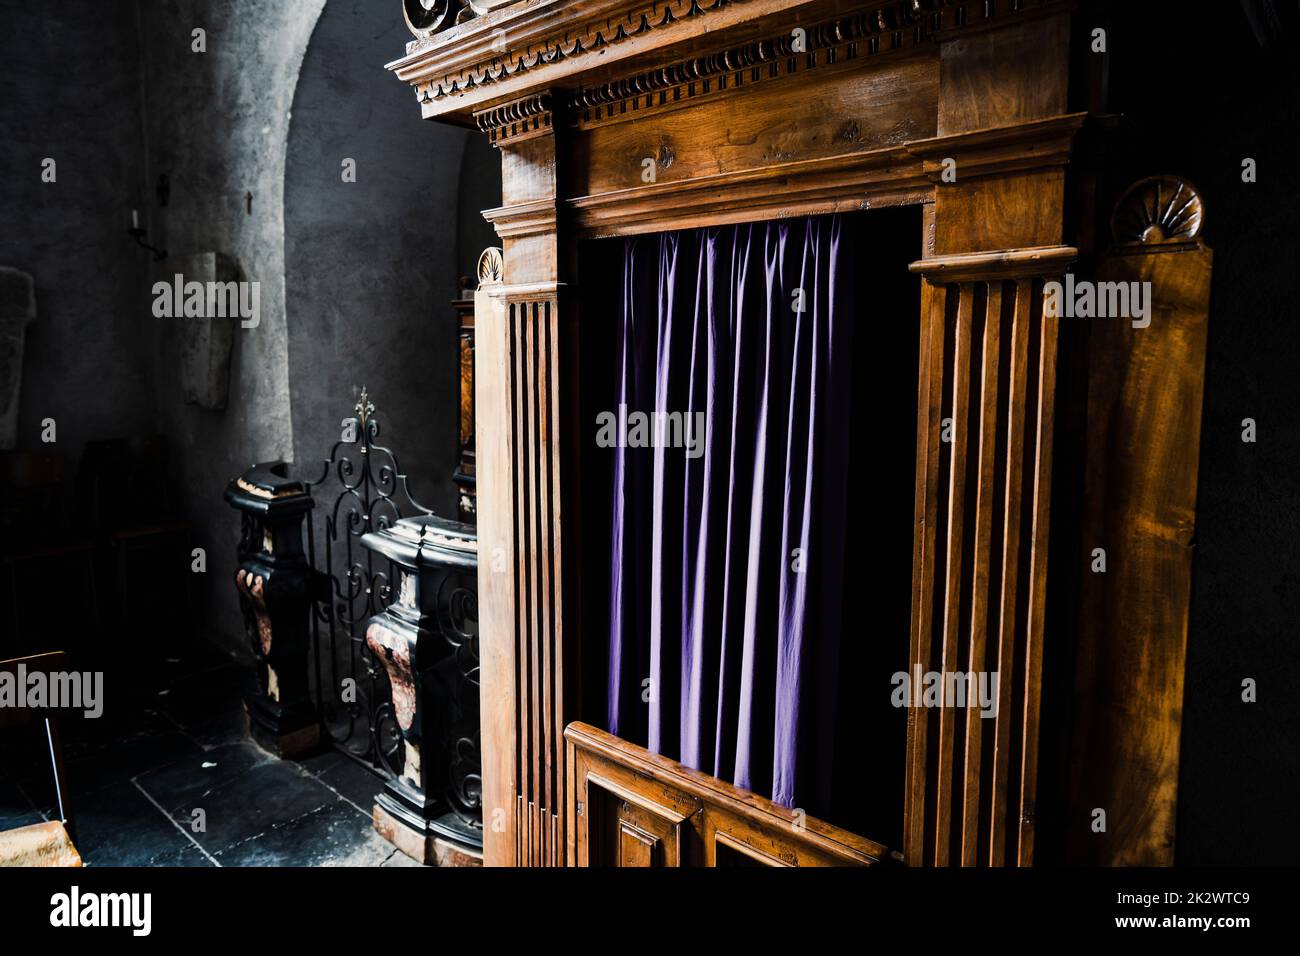 Typical old wooden confession booth at a church, with blue curtains. Stock Photo